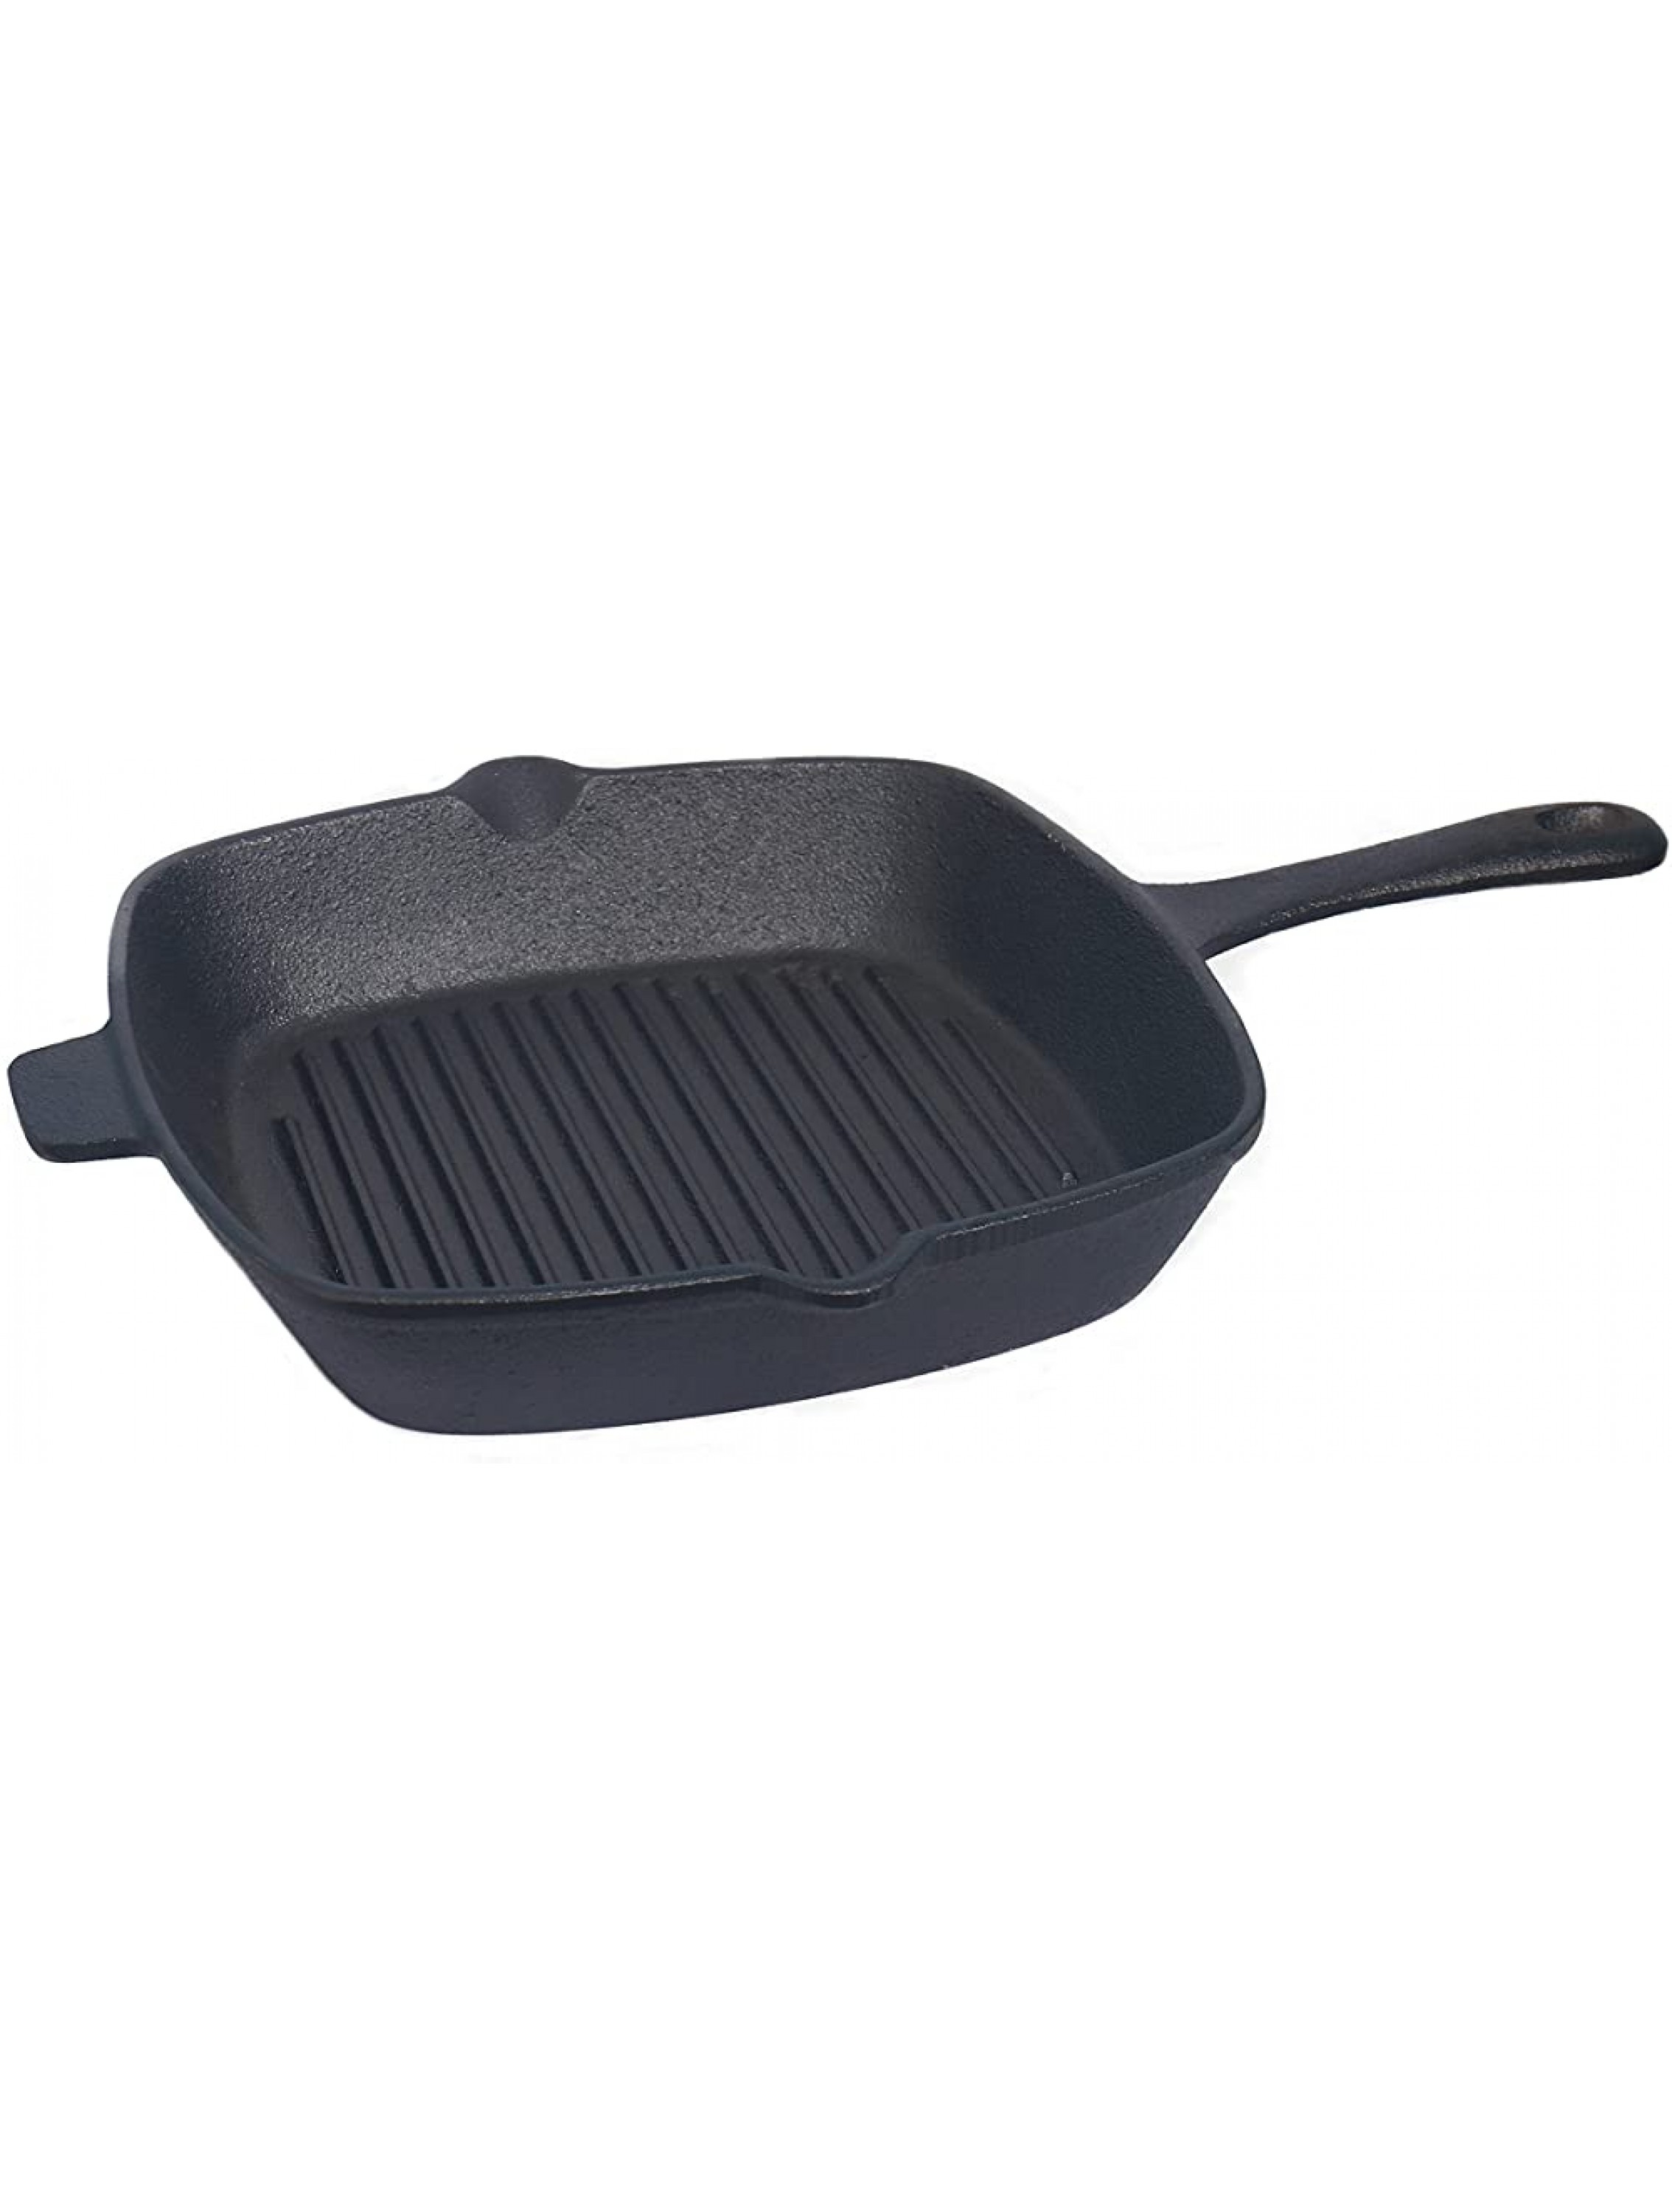 RikoTech 10 inch Cast Iron Griddle for Gas Stovetop 2-in-1 Grill Pan Skillet Large Reversible Grill Griddle Pre-Seasoned for Non-Stick Like Surface Cookware Oven Broiler with Easy Grip Handles - B0O1XL129